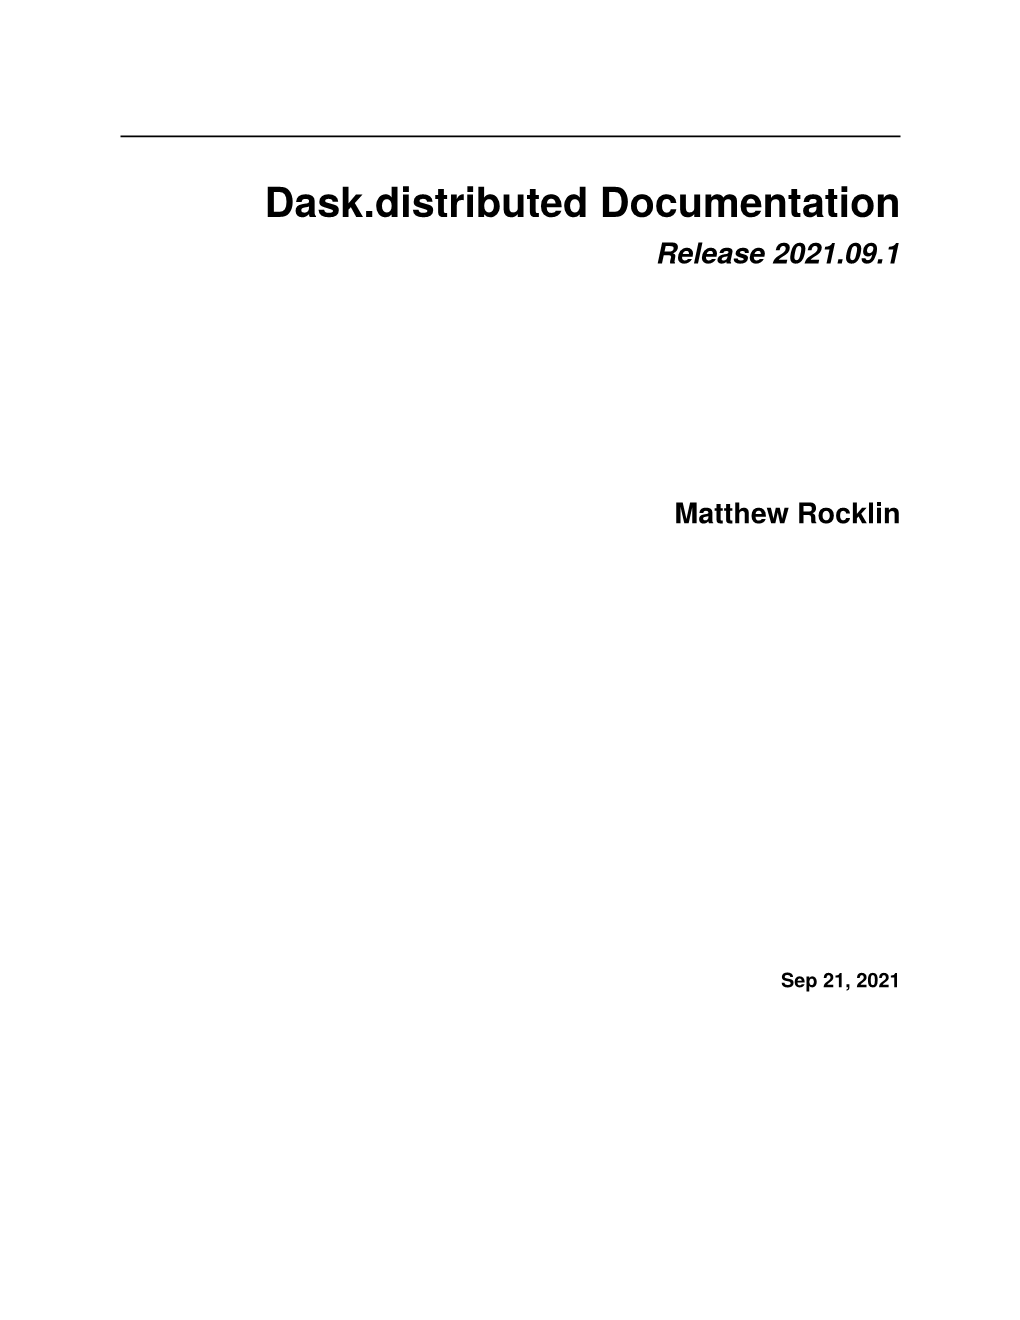 Dask.Distributed Documentation Release 2021.09.1